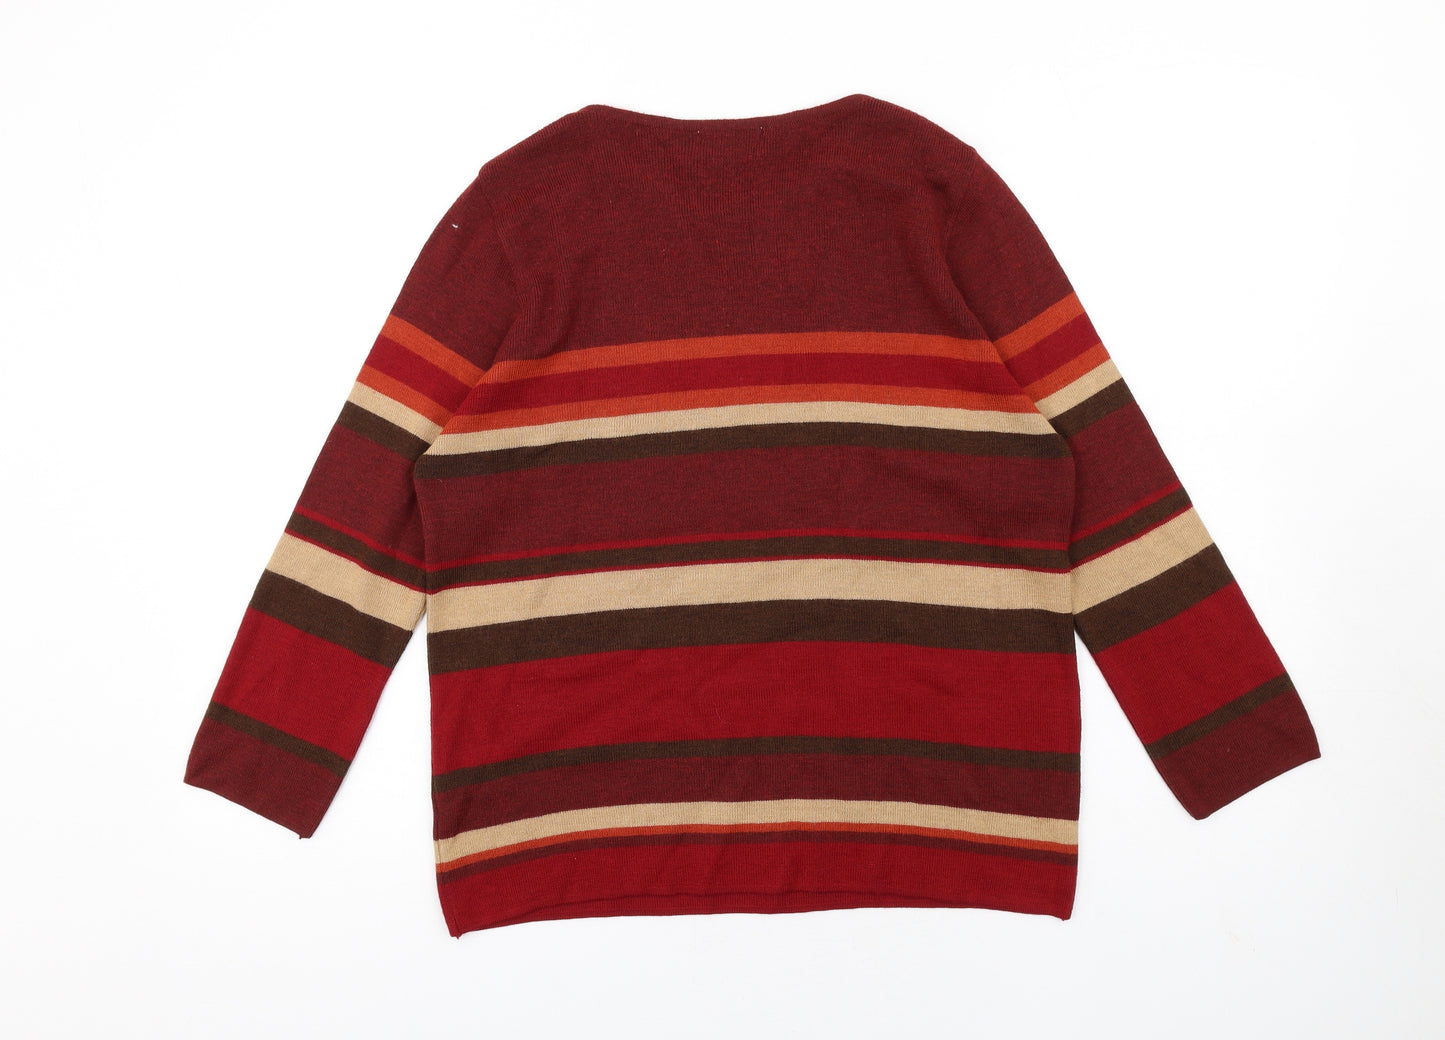 Jumper Mens Multicoloured Round Neck Striped Wool Pullover Jumper Size M Long Sleeve